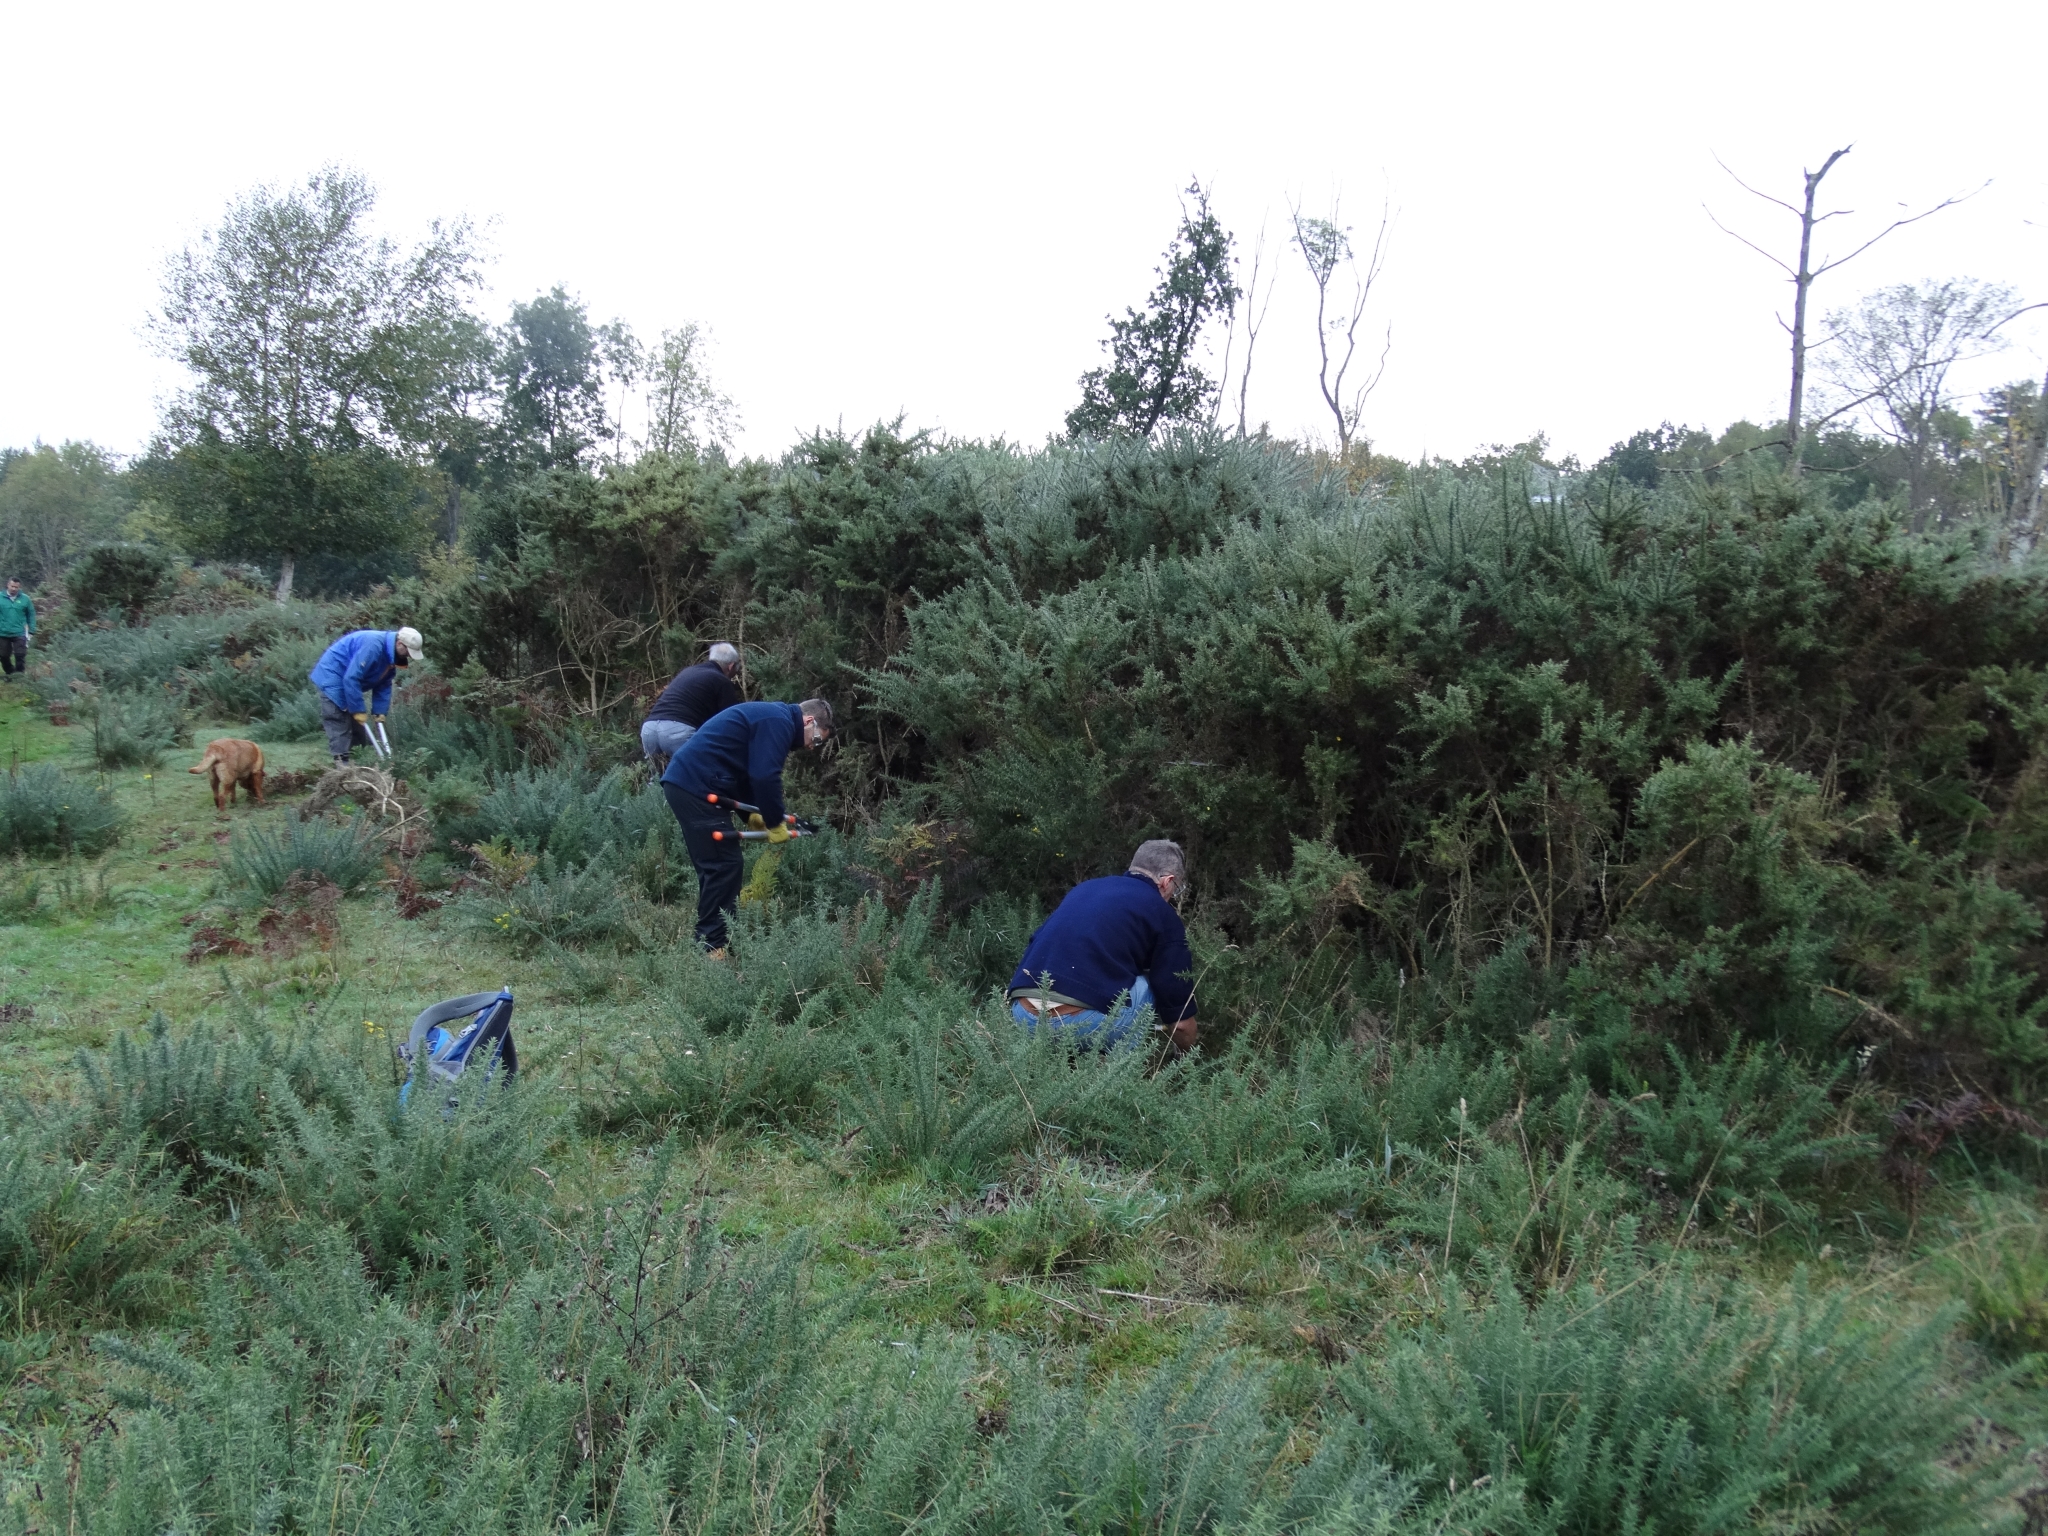 A photo from the FoTF Conservation Event - October 2019 - Gorse Clearance at Hockham Hills & Holes : Volunteers work to remove Gorse